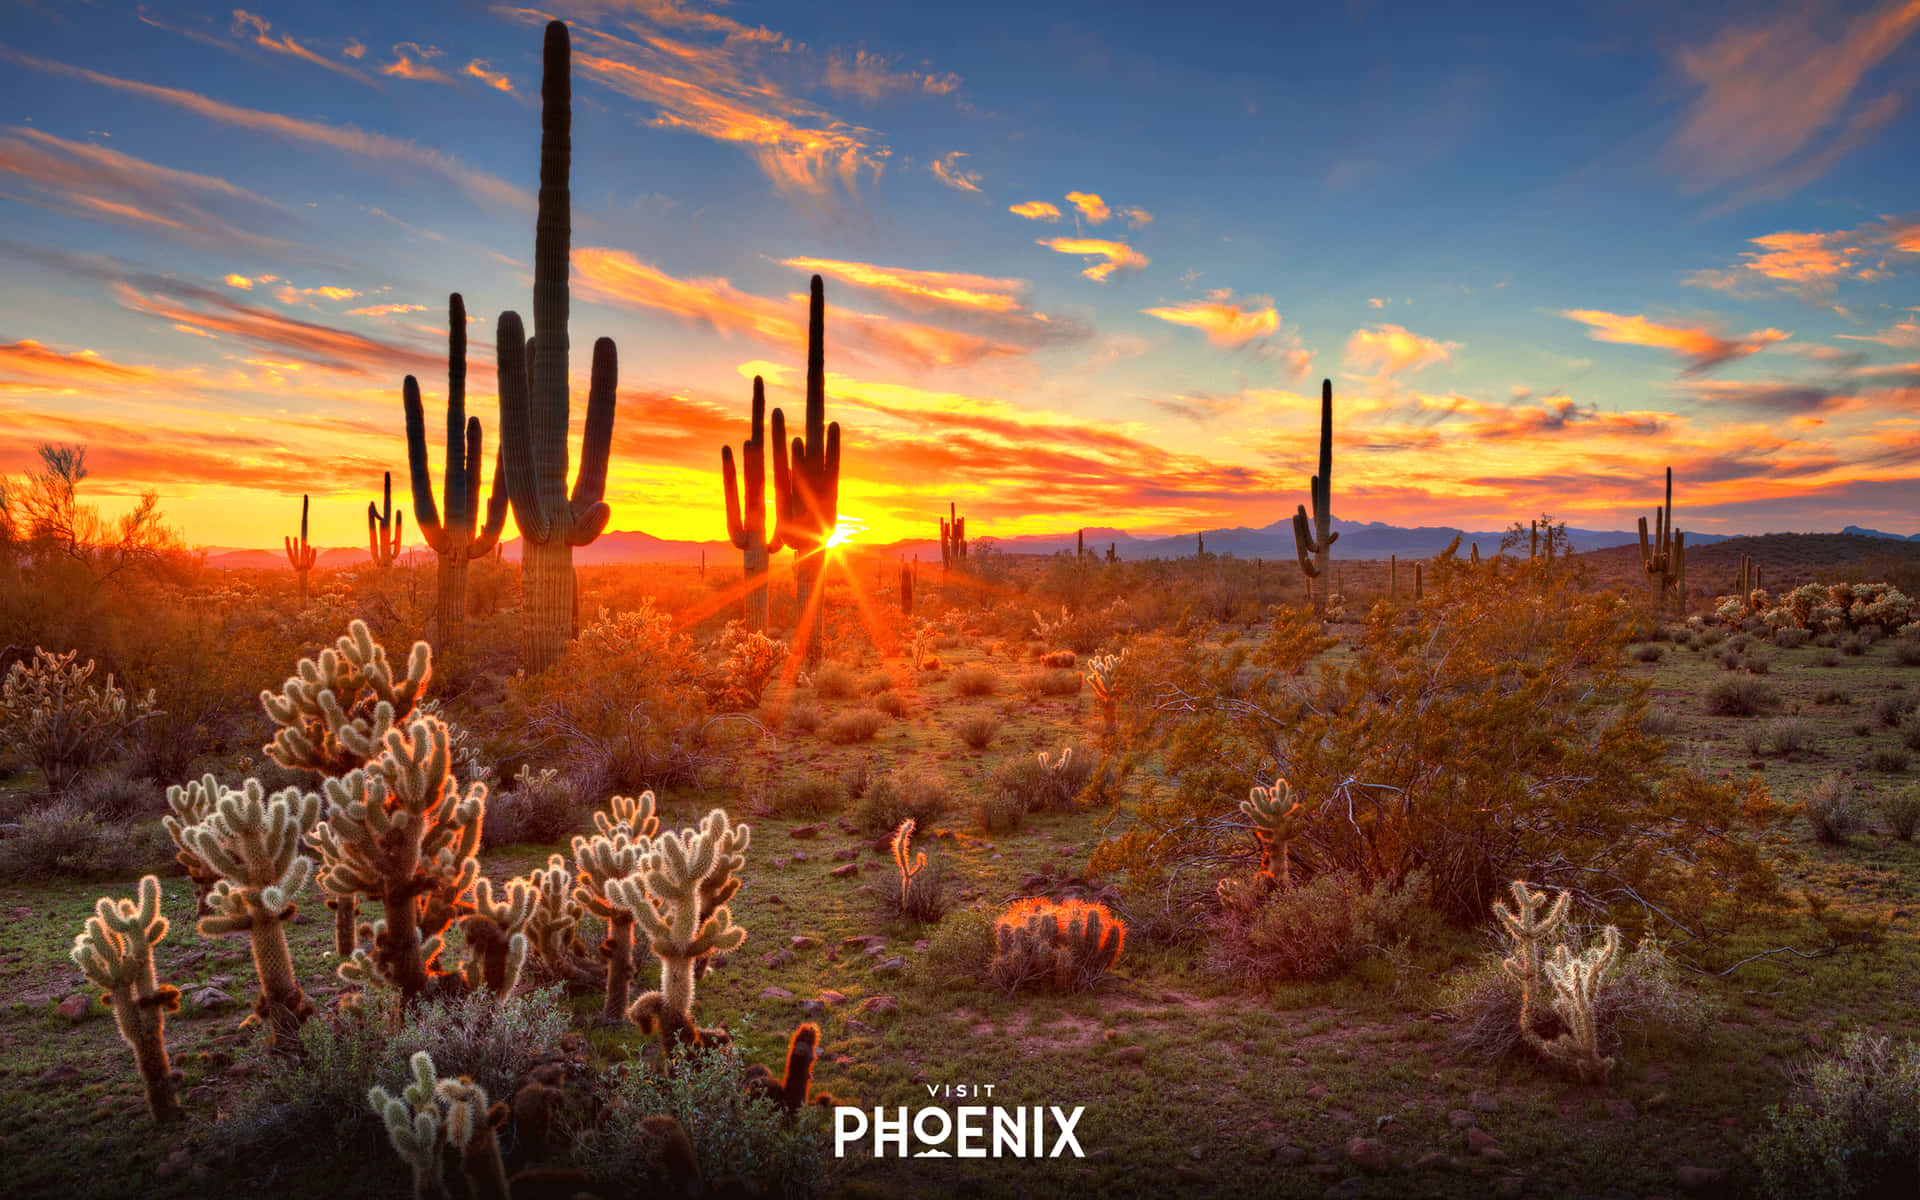 500 Stunning Arizona Pictures Scenic Travel Photos  Download Free  Images on Unsplash